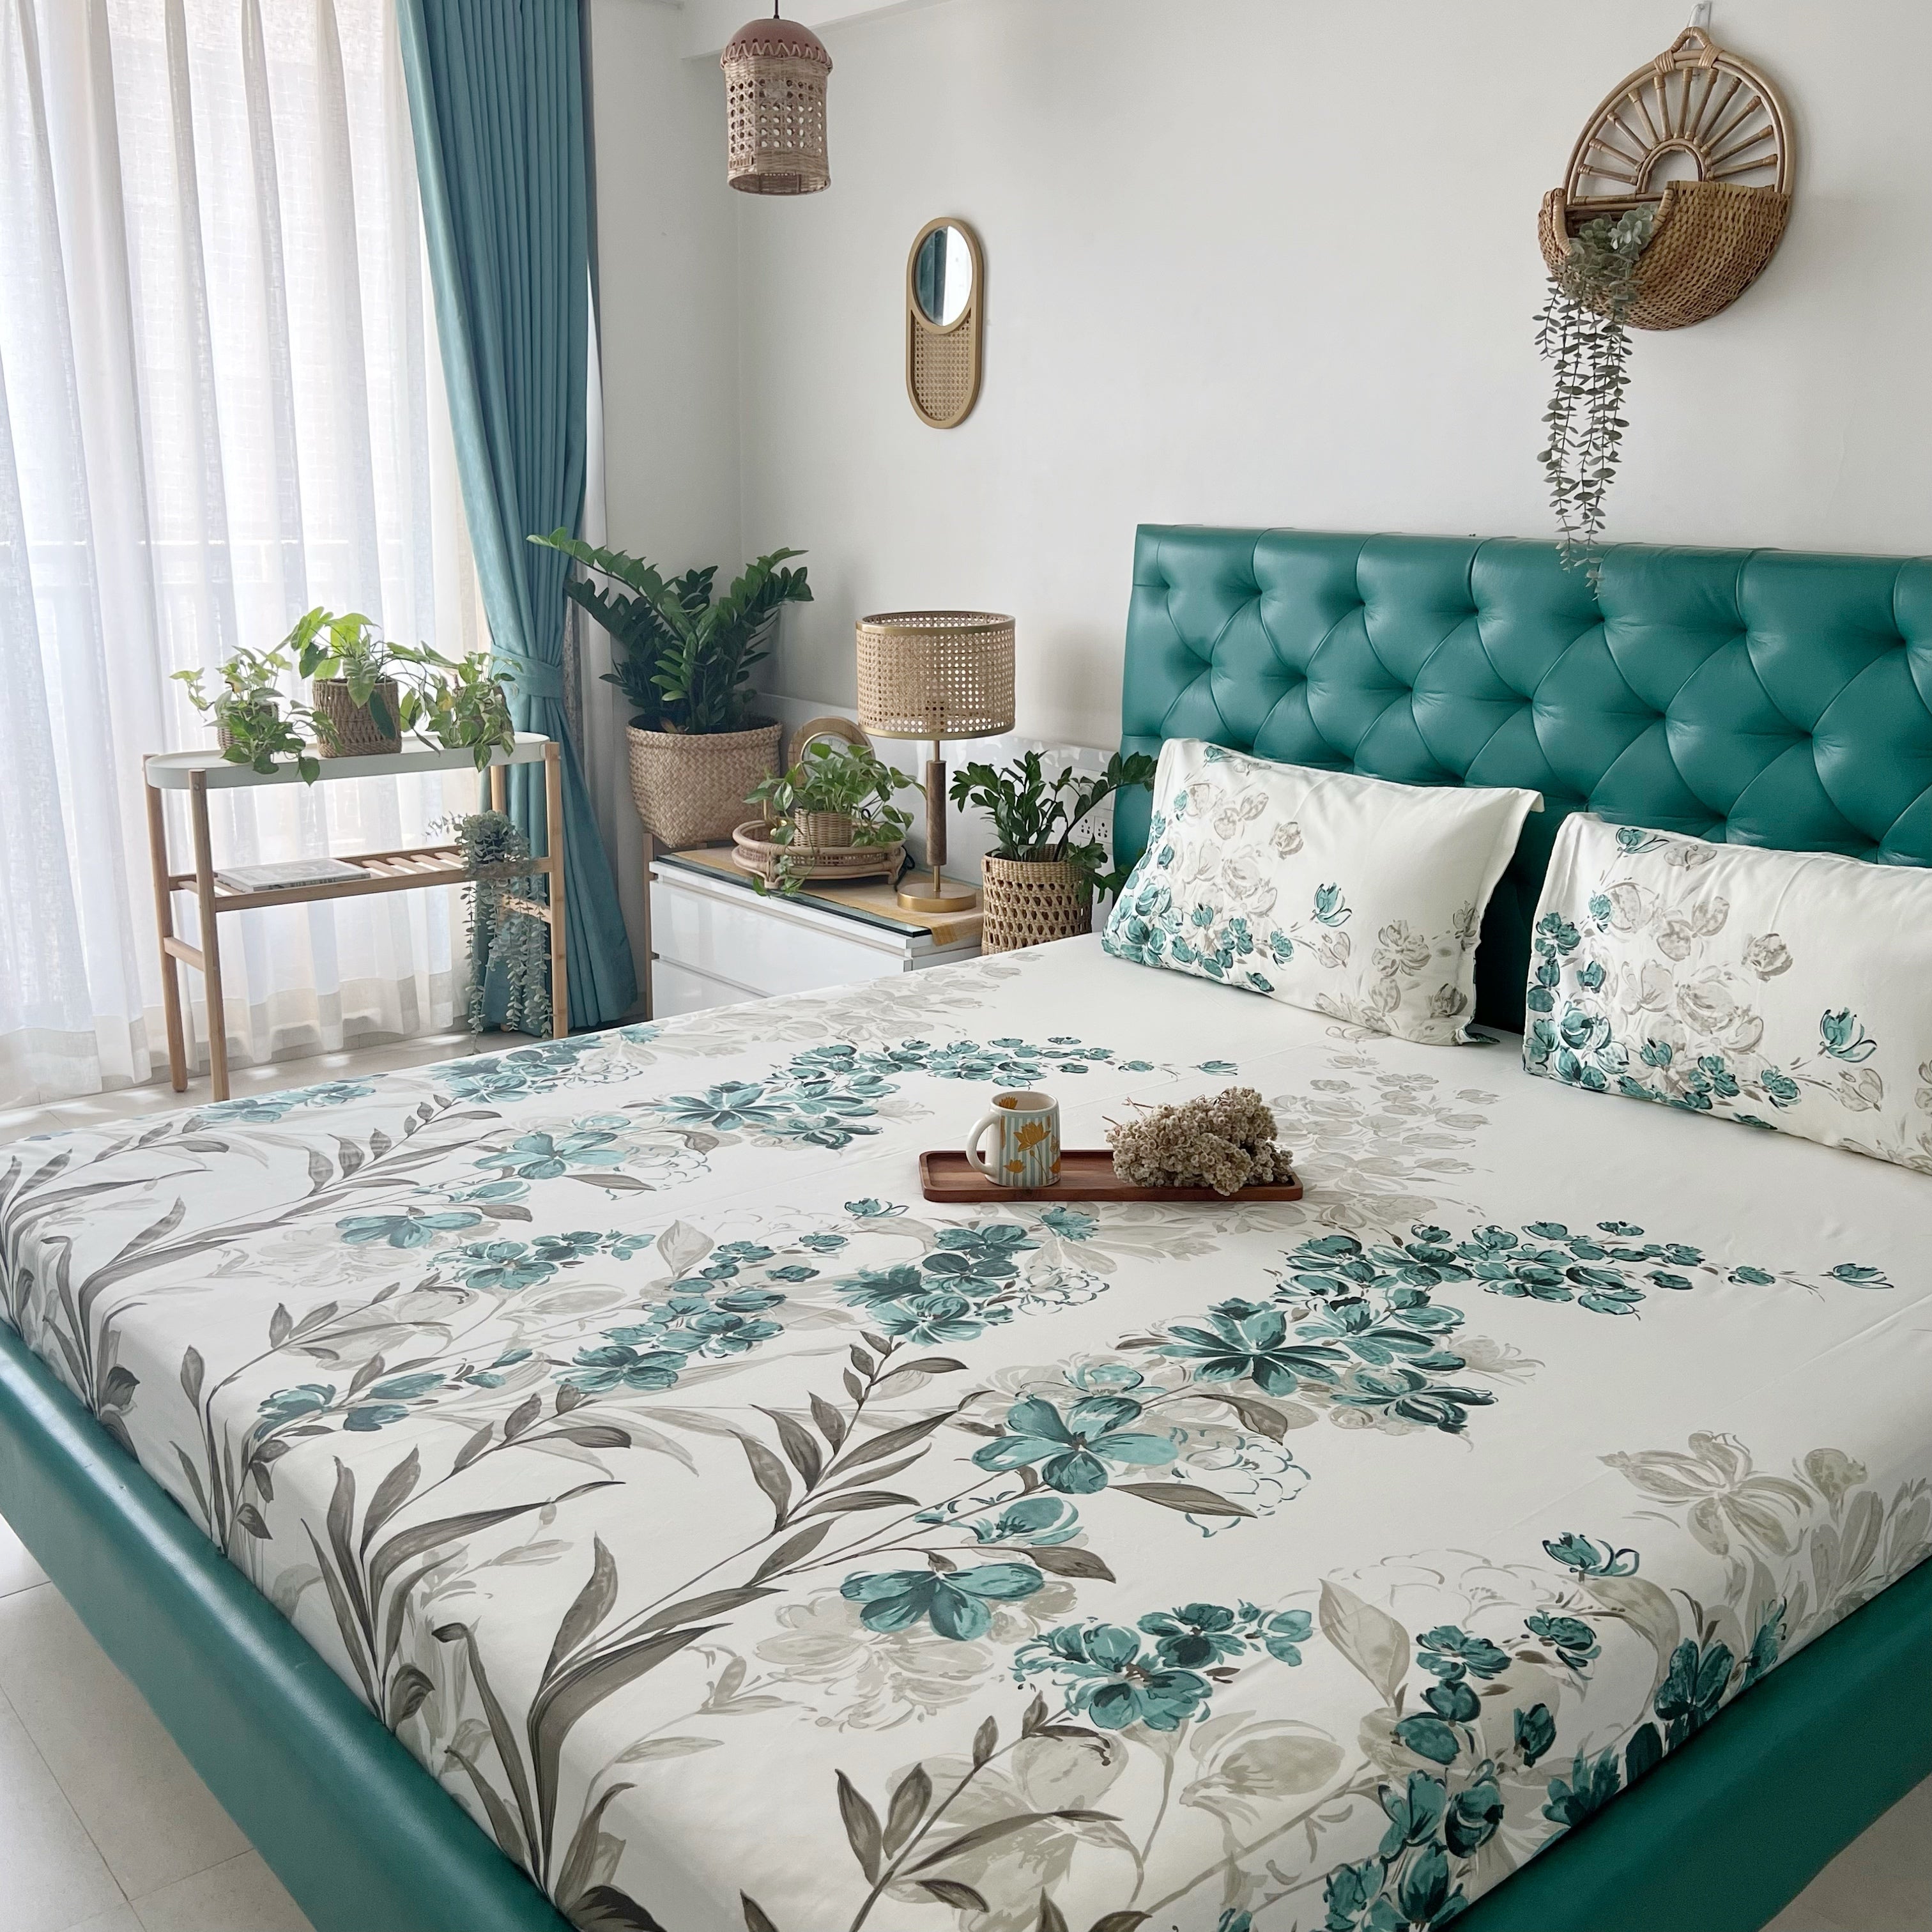 The Perfect Match: Best Bedsheet and Wall Color Combinations to Suit Your Room